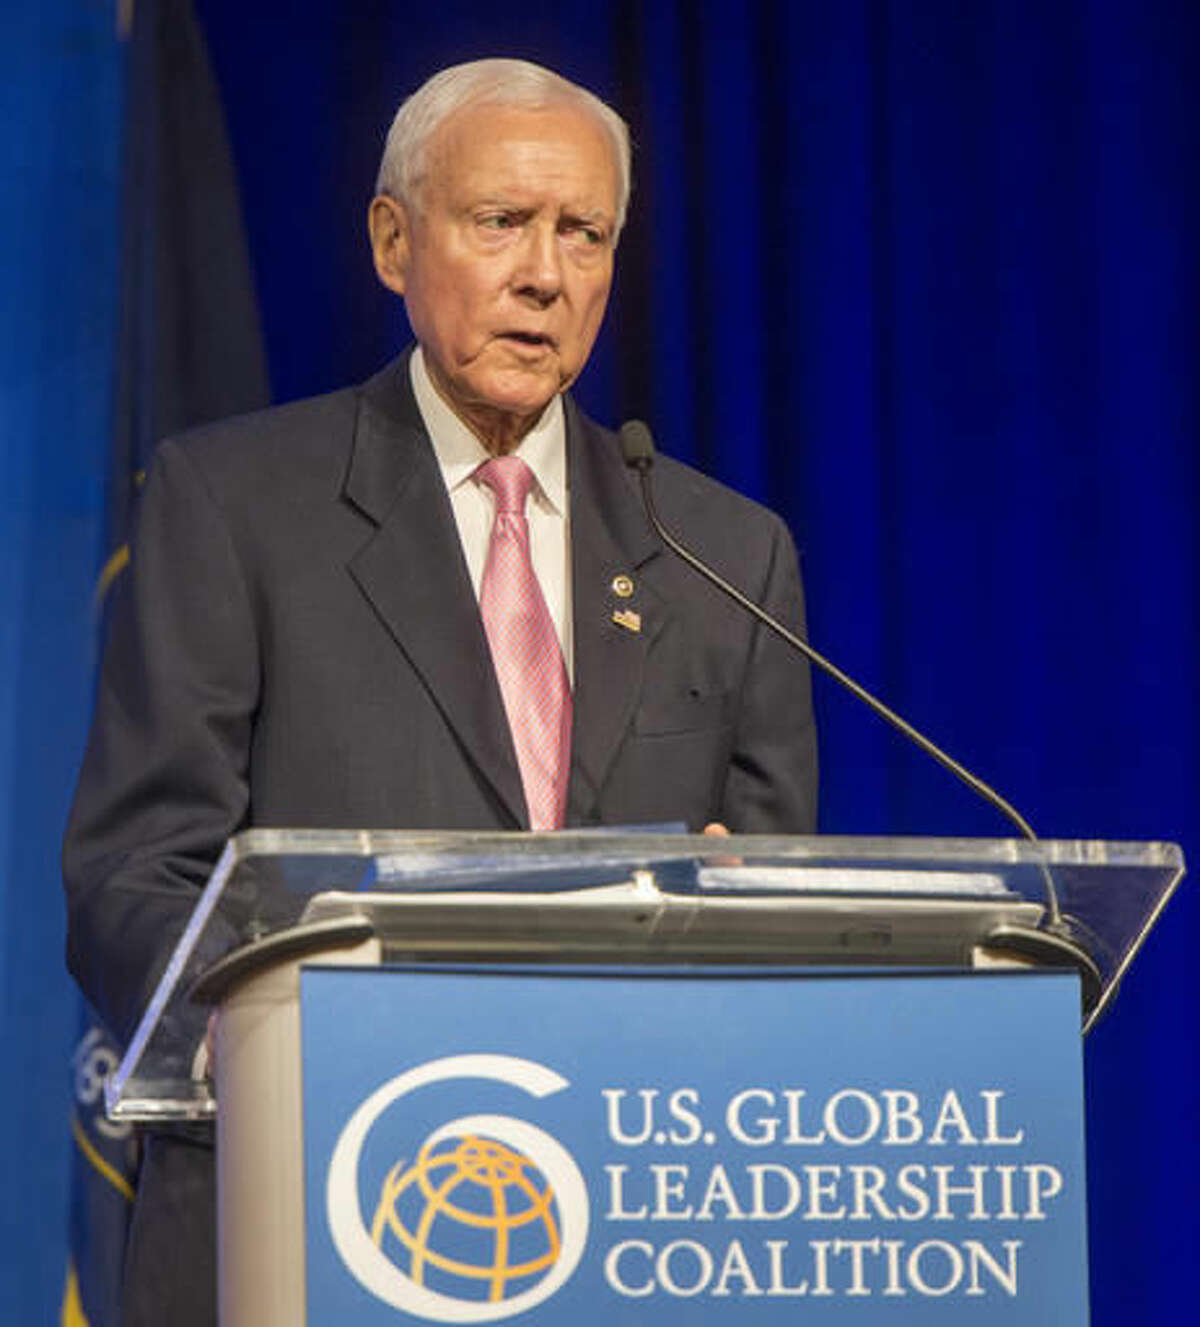 Sen. Orrin Hatch gives the keynote speech at the U.S. Global Leadership Coalition luncheon, at the Grand America in Salt Lake City, Friday, Nov. 18, 2016. Hatch said President-elect Donald Trump is an extraordinary man and very bright guy who understands trade but there may be work to do to encourage some of those in his administration that open markets are key to America's economic and security interests. (Rick Egan/The Salt Lake Tribune via AP)